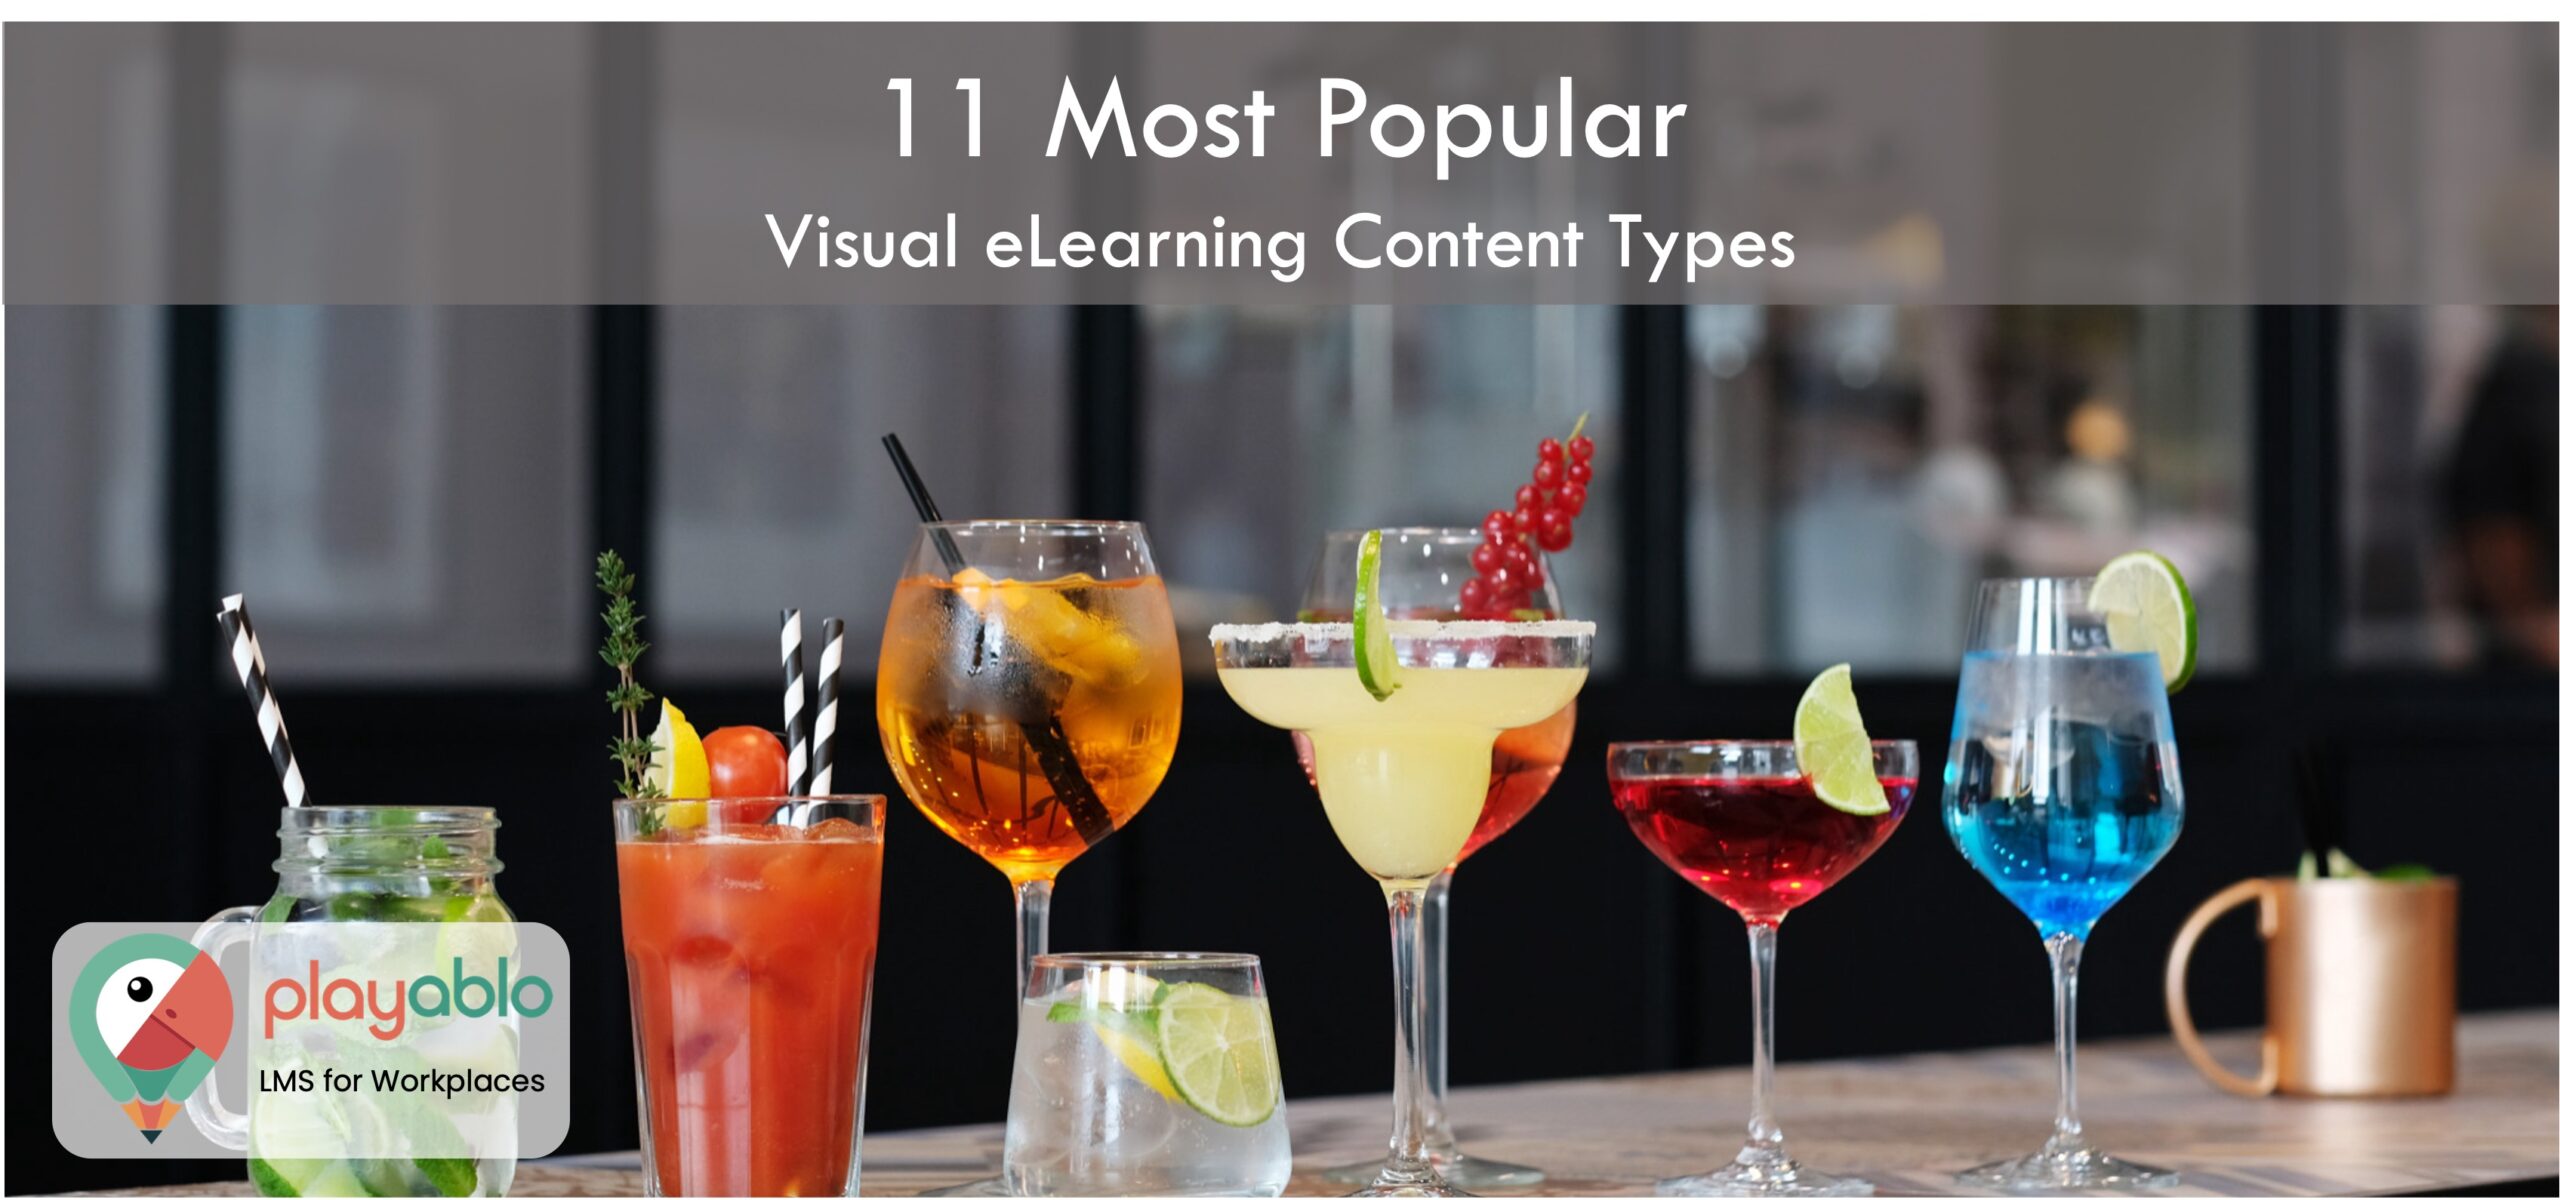 visual-elearning-content-types